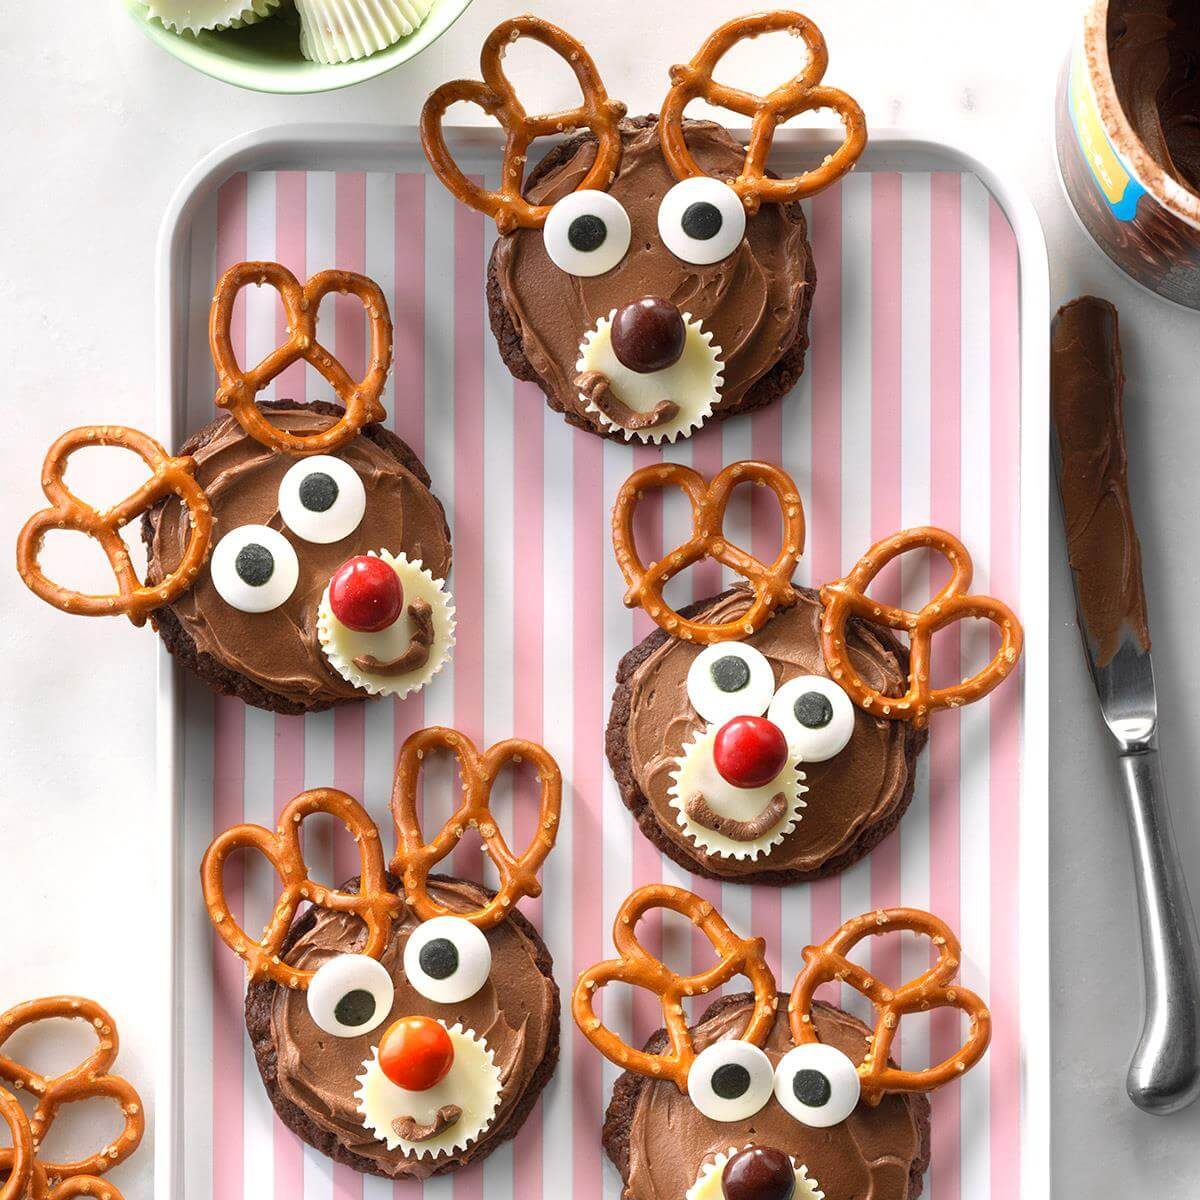 34 Fun and Festive Christmas Recipes for Kids